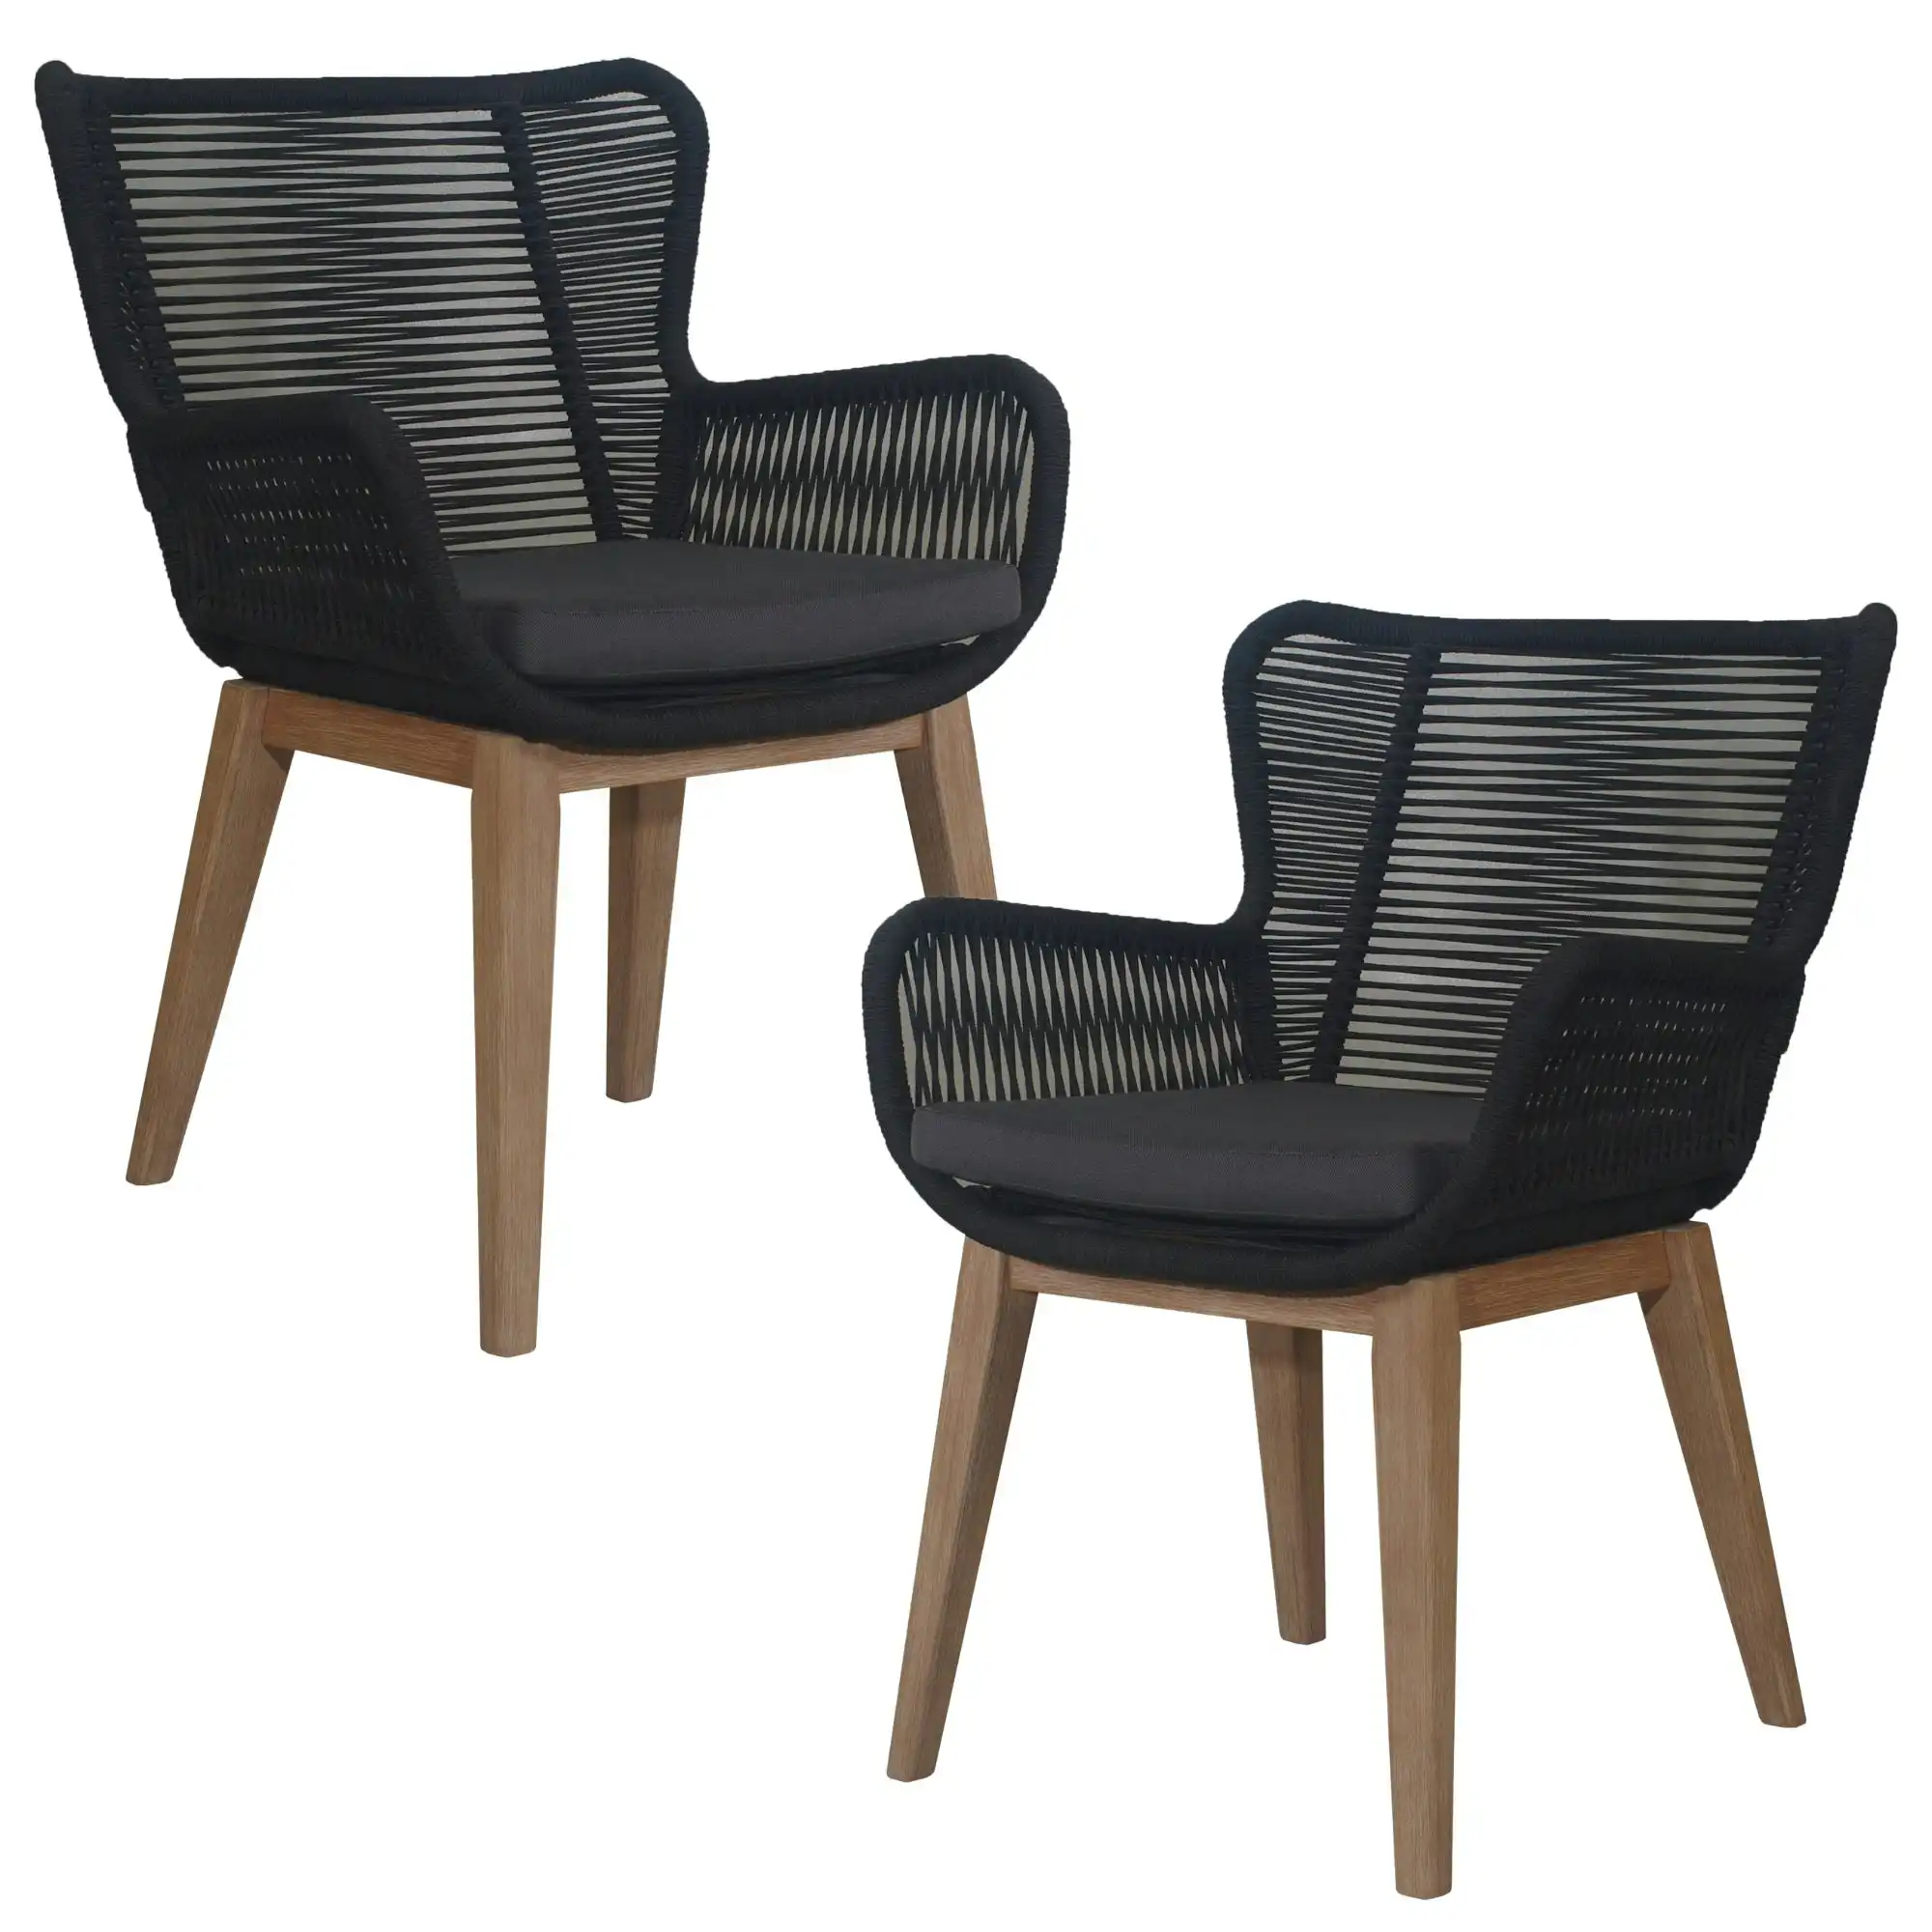 Stud Set of 2 Outdoor Dining Chair